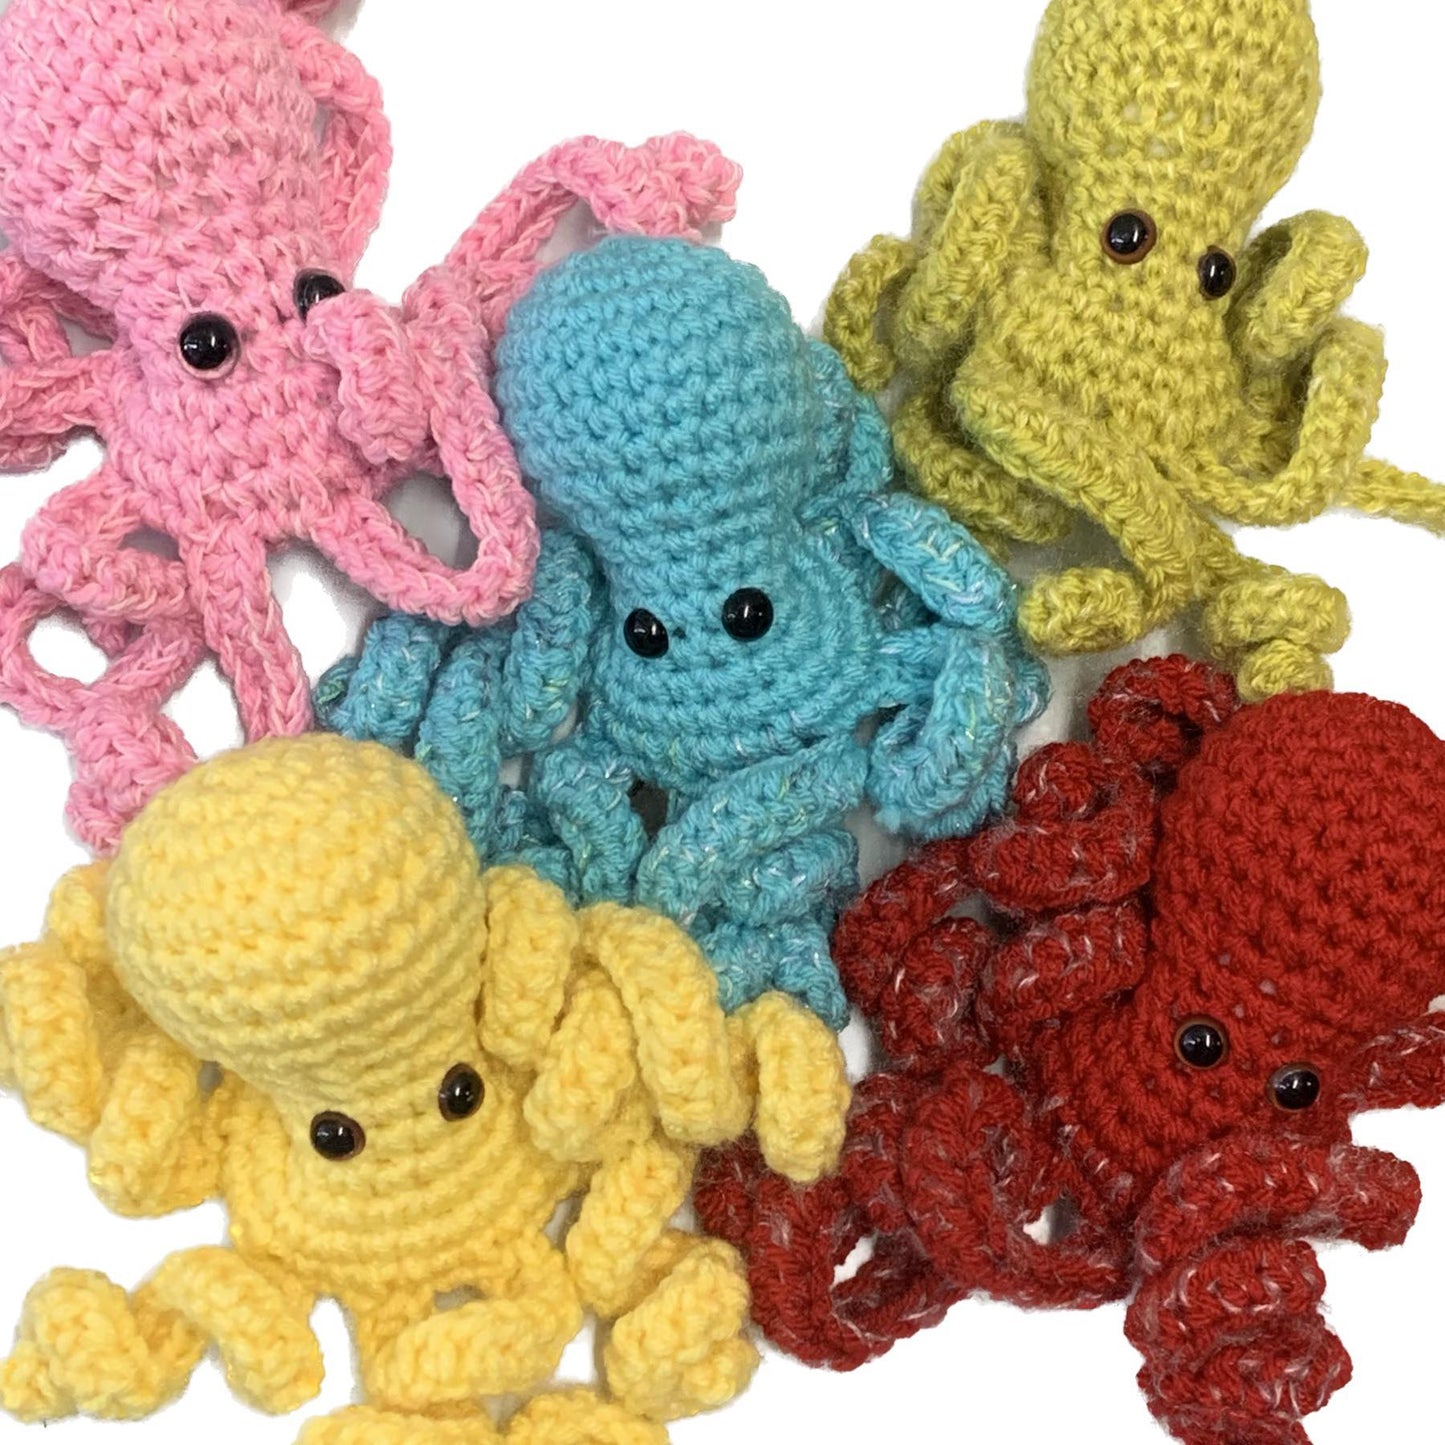 BEAKNITS- CROCHETED OCTOPUS - Blue with Yellow